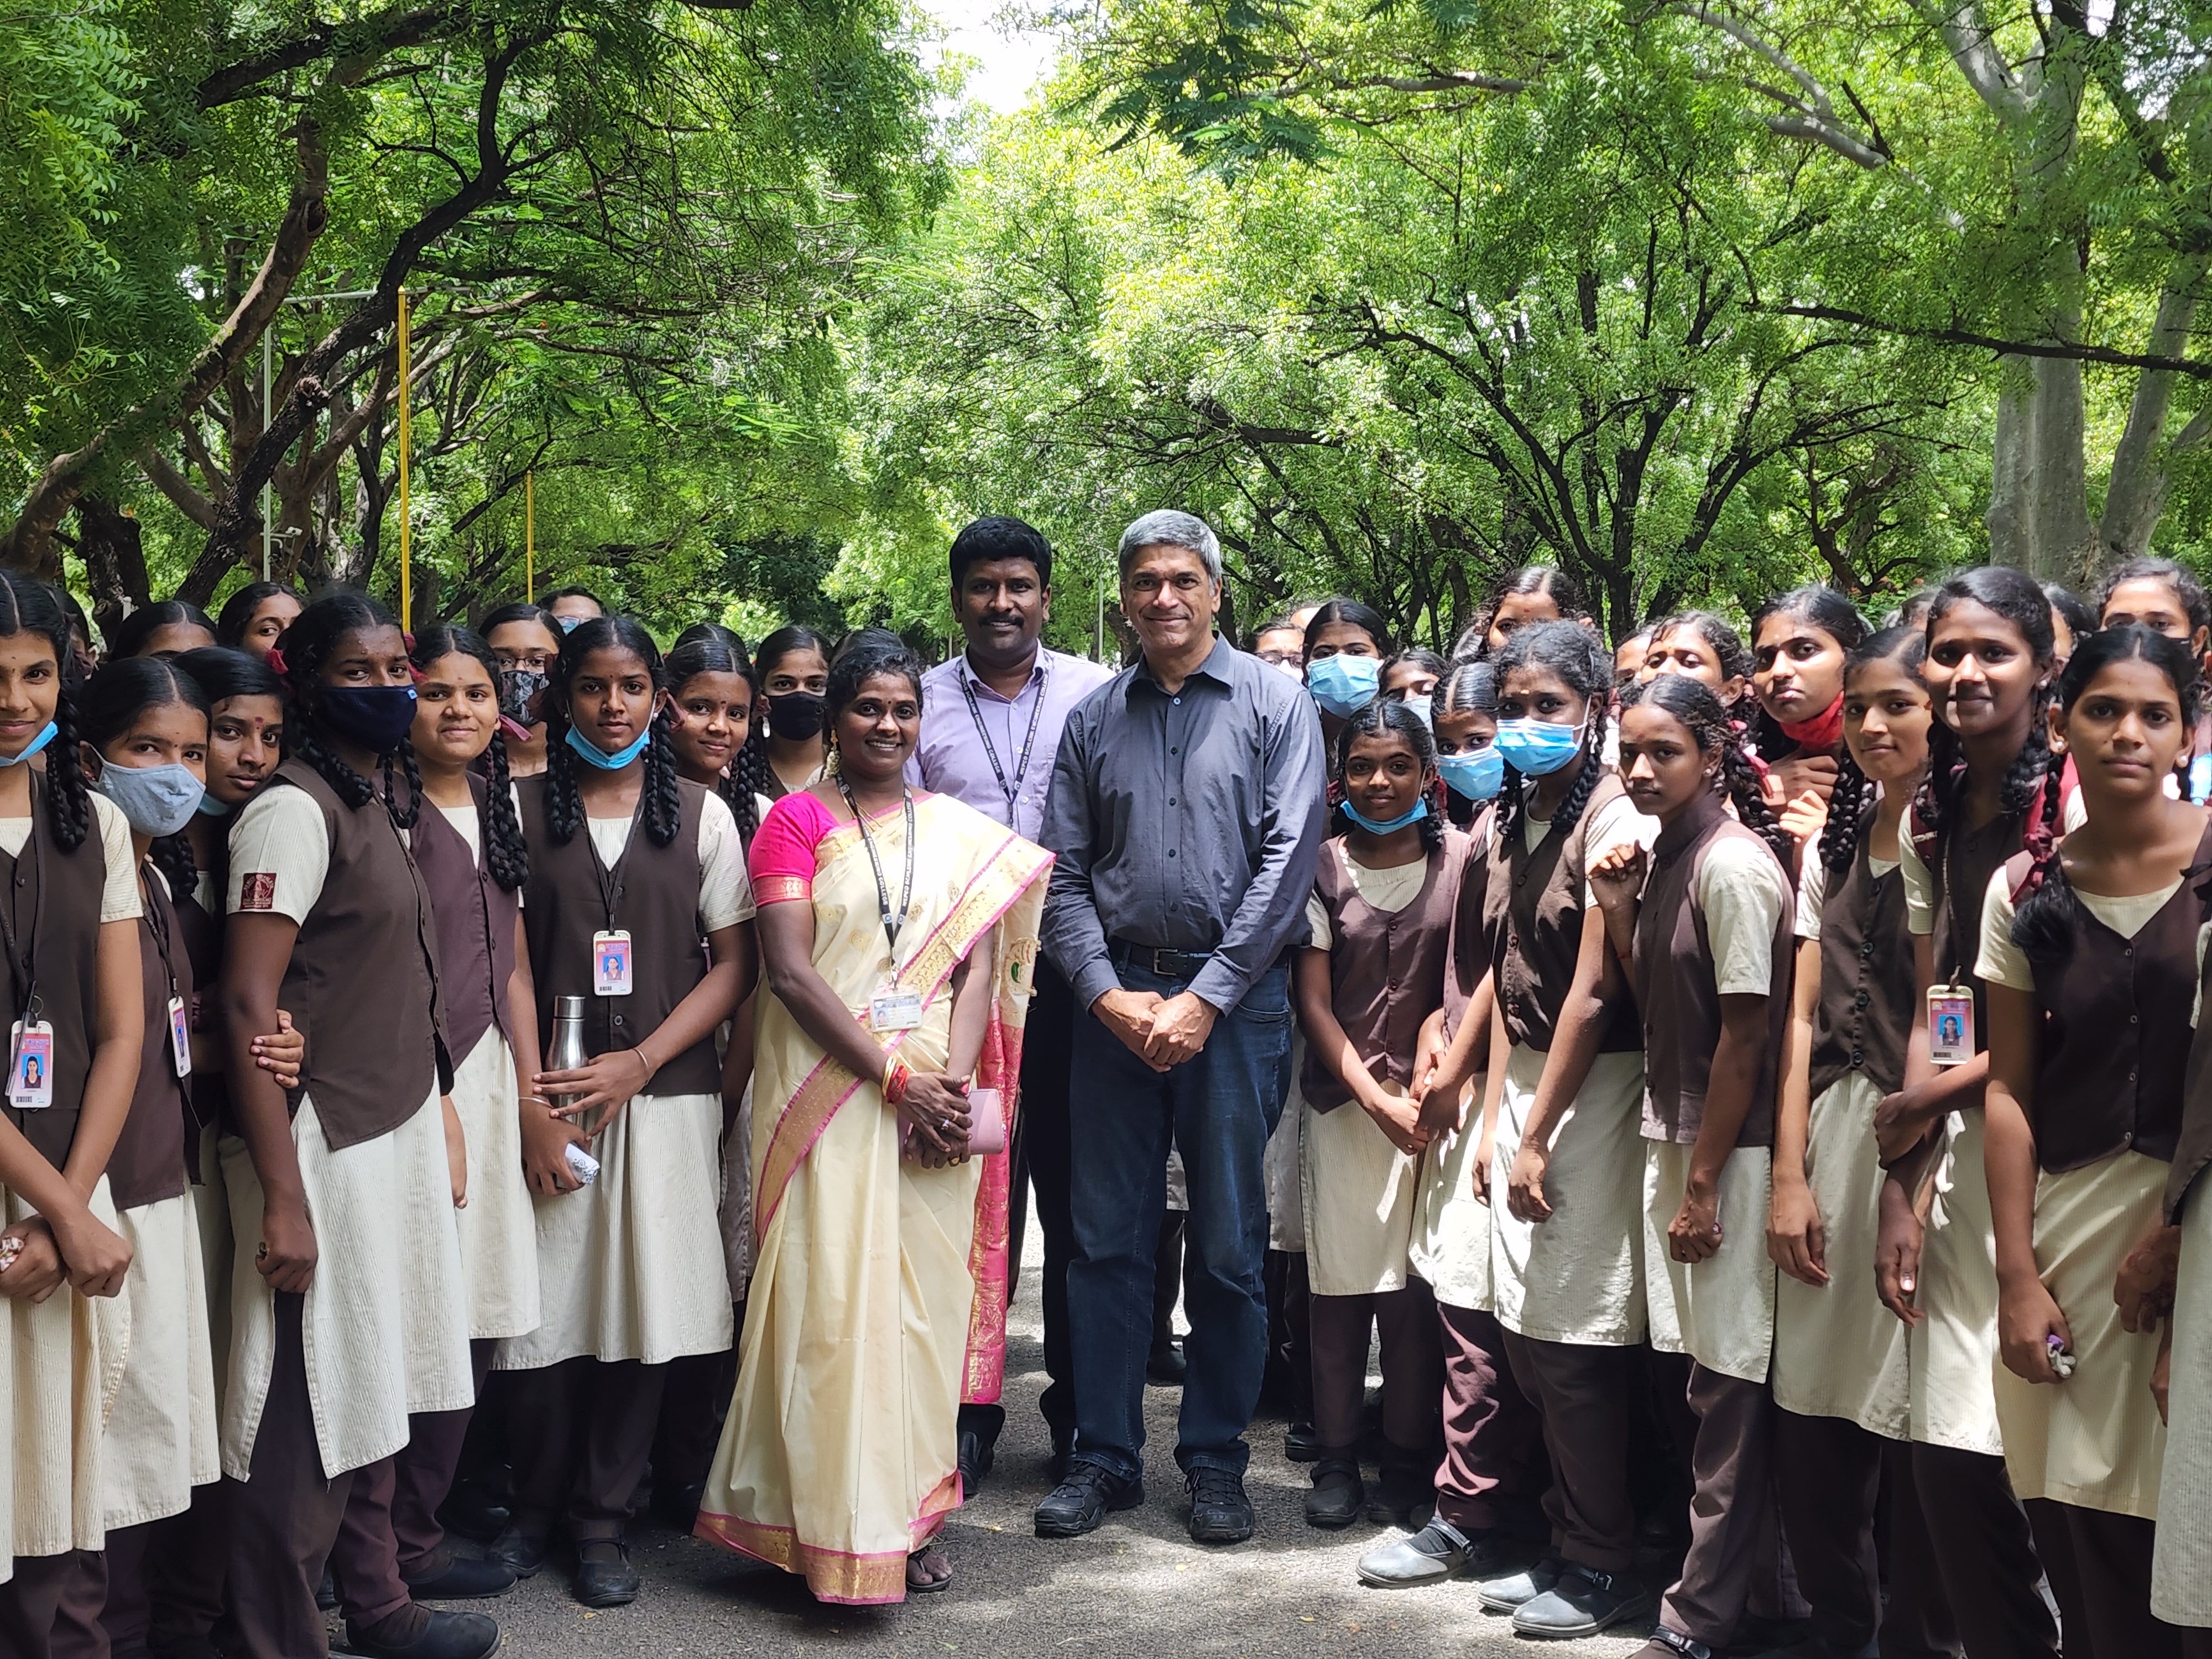 Lance with hosts, Dr. C. Gangalakshmi and Dr. L. Saranraj, along with local school students who visited the college.